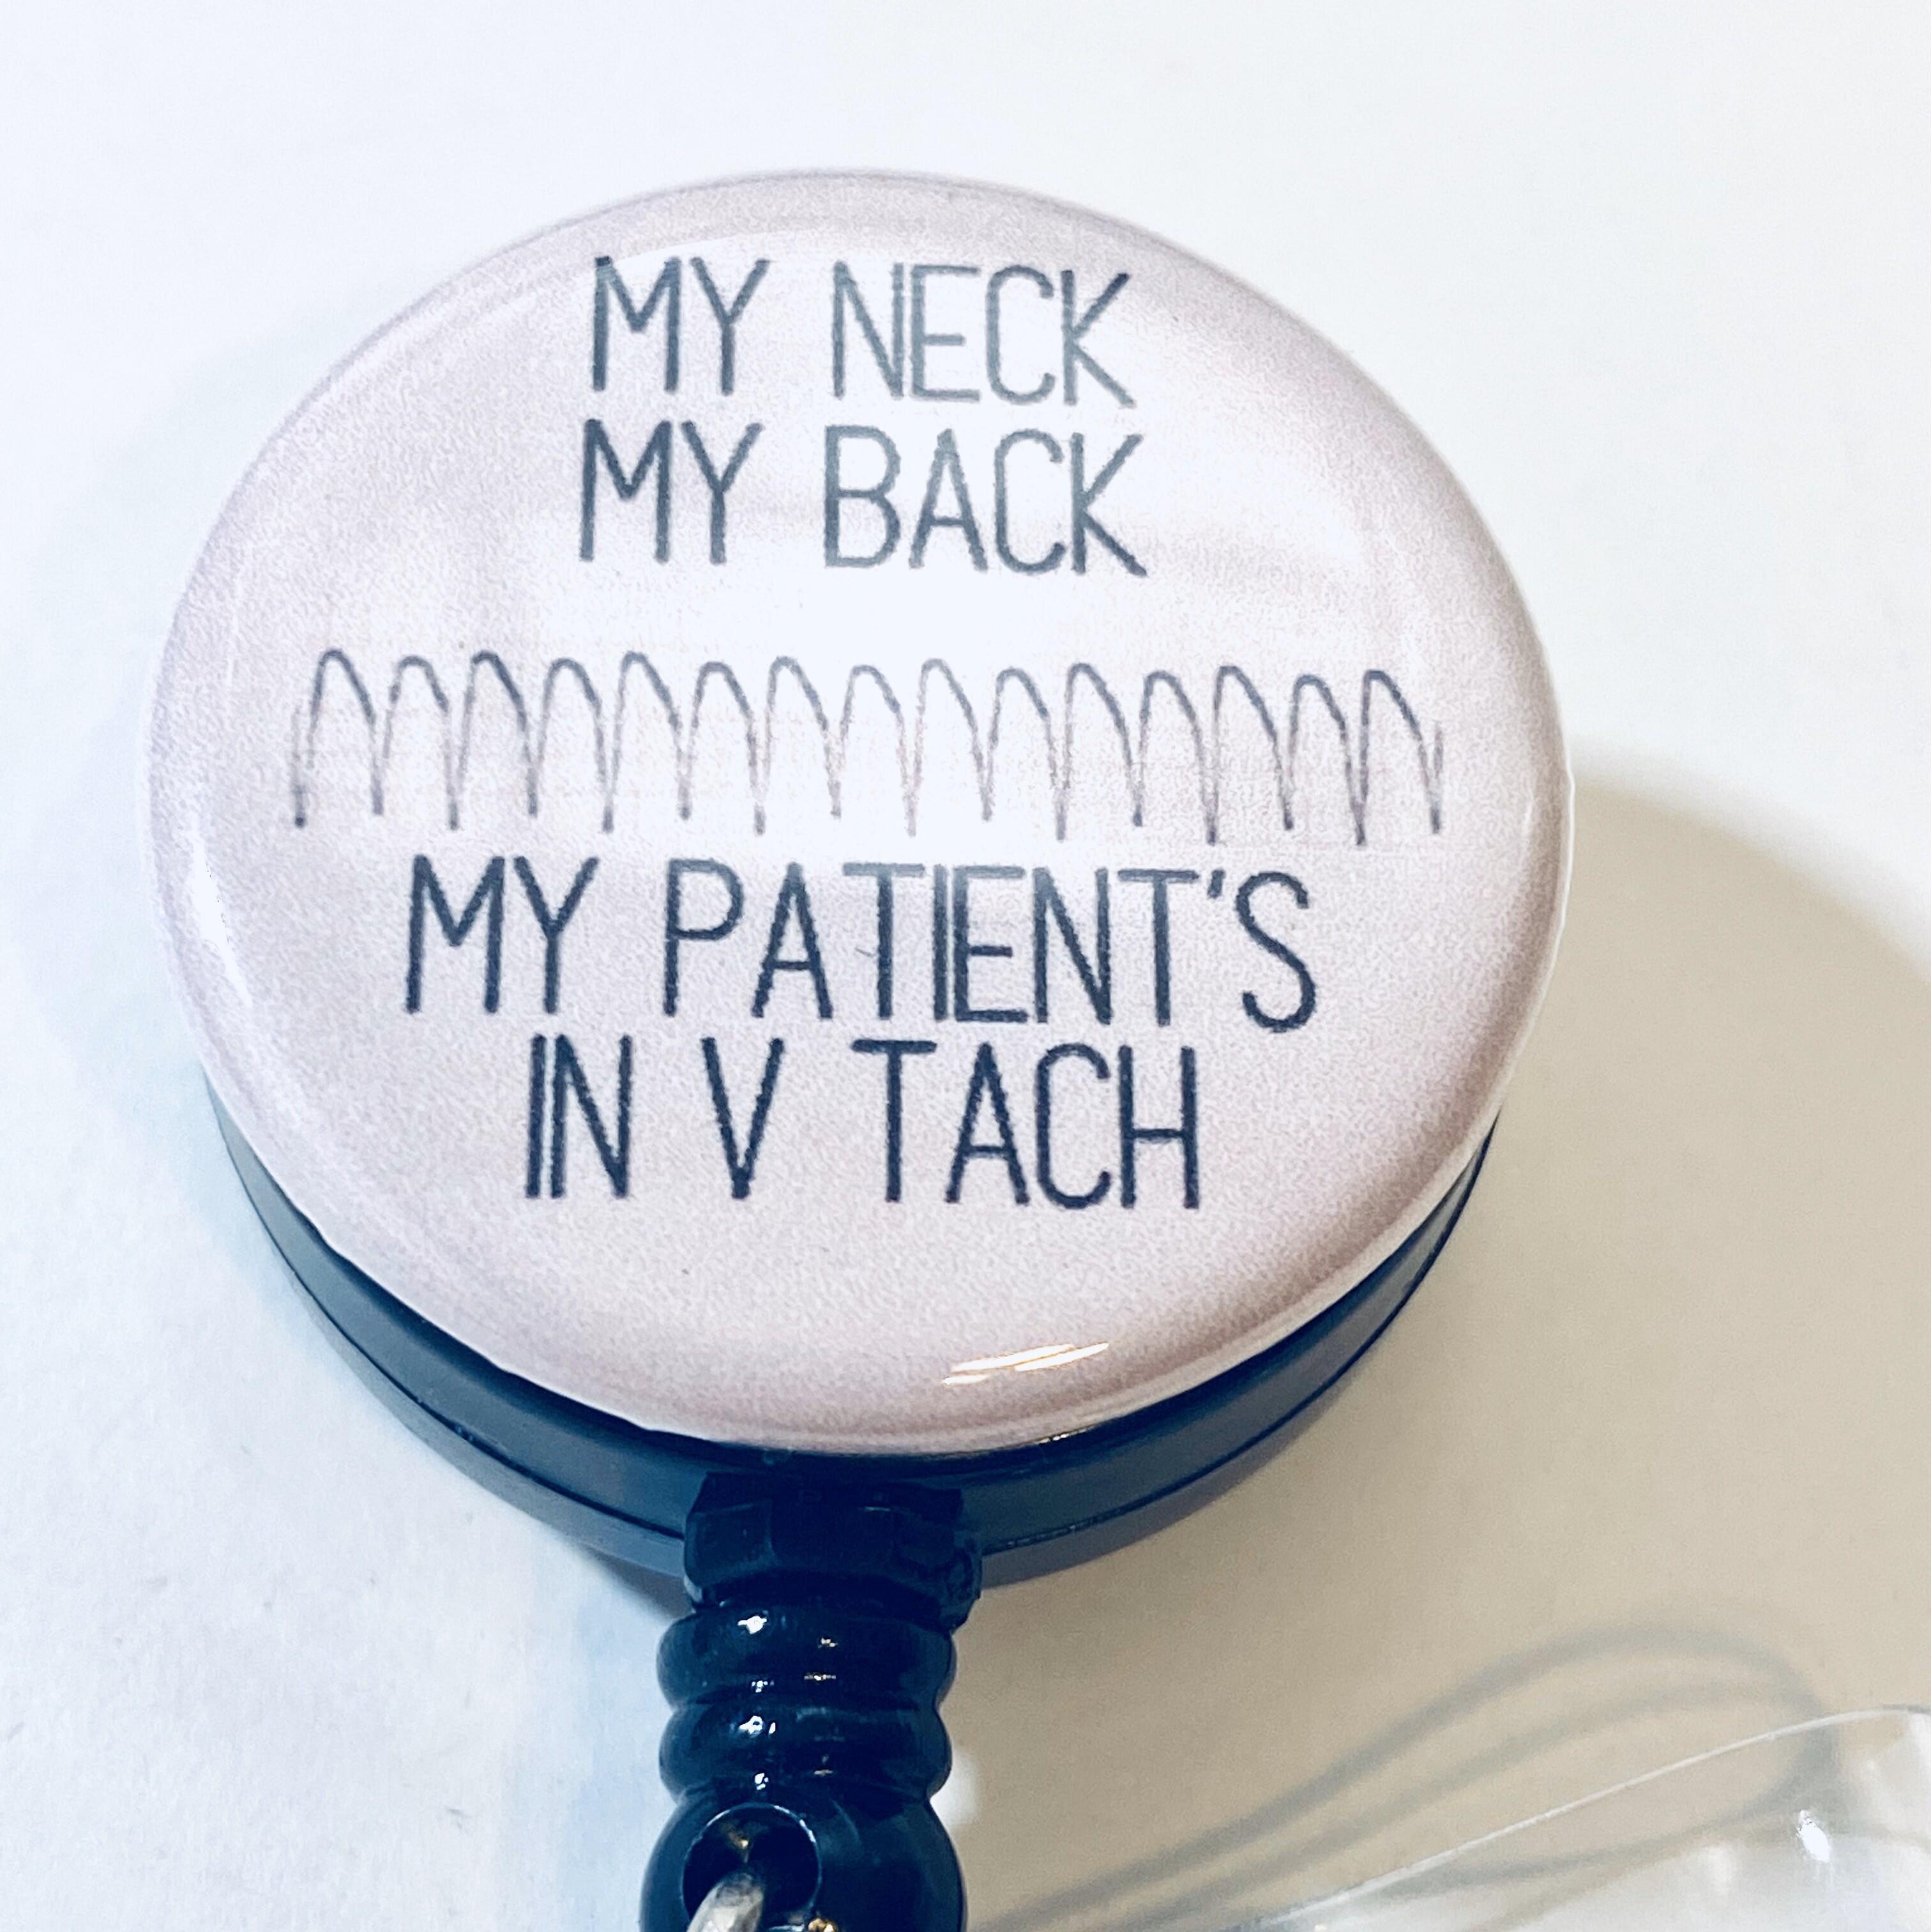 Handmade My Neck My Back My Patient’s in V Tach Retractable Badge Reel, Pressed Image Name Tag ID Reel